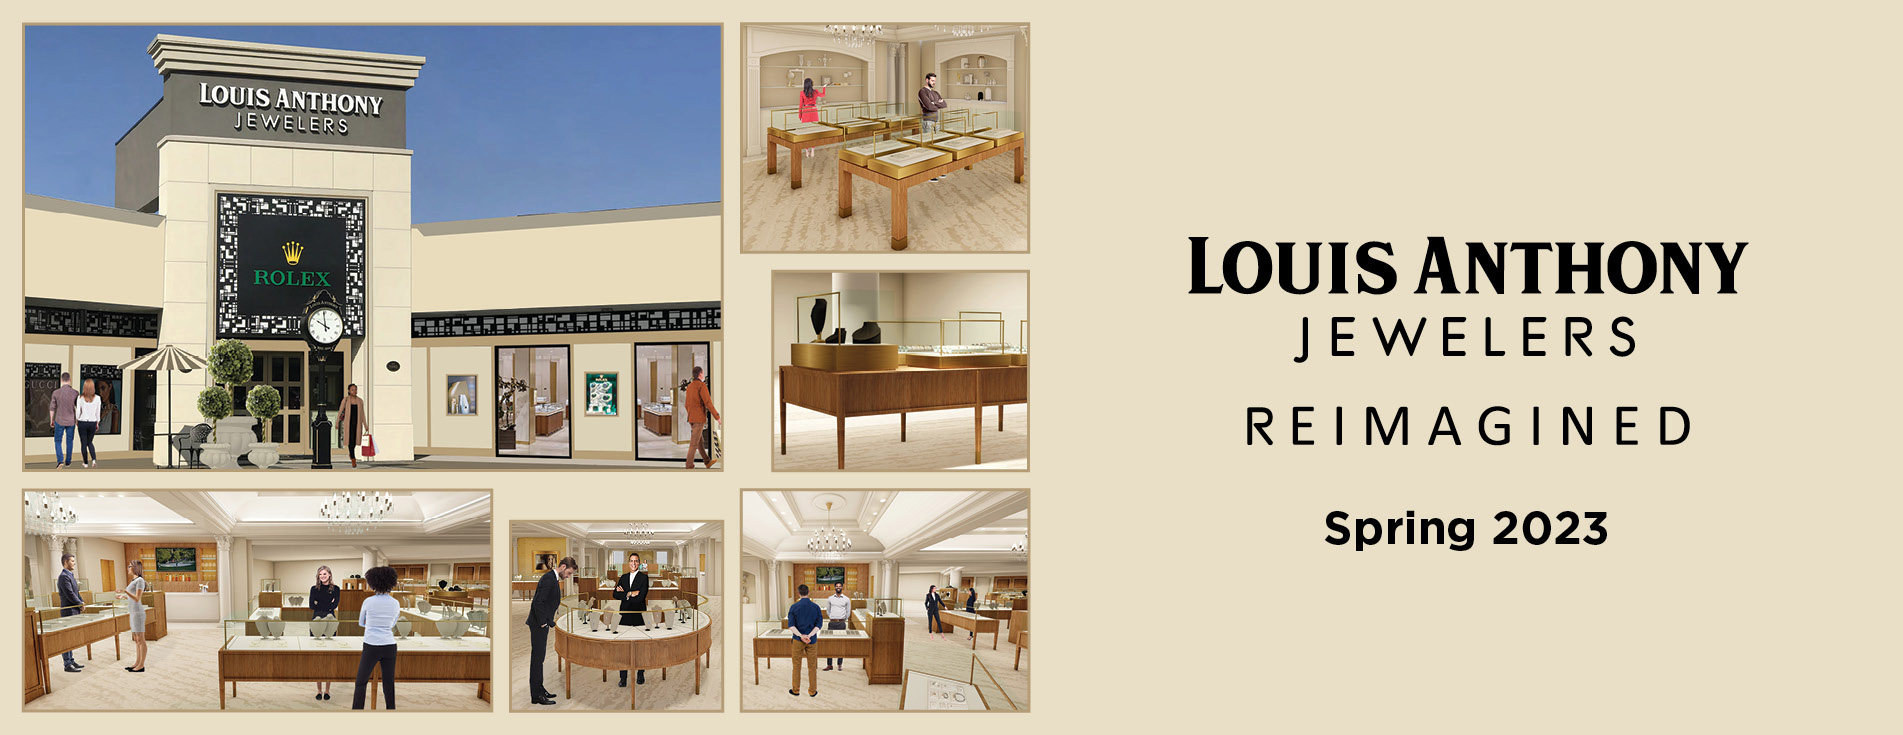 Louis Anthony Jewelers Reimagined, Pittsburgh PA